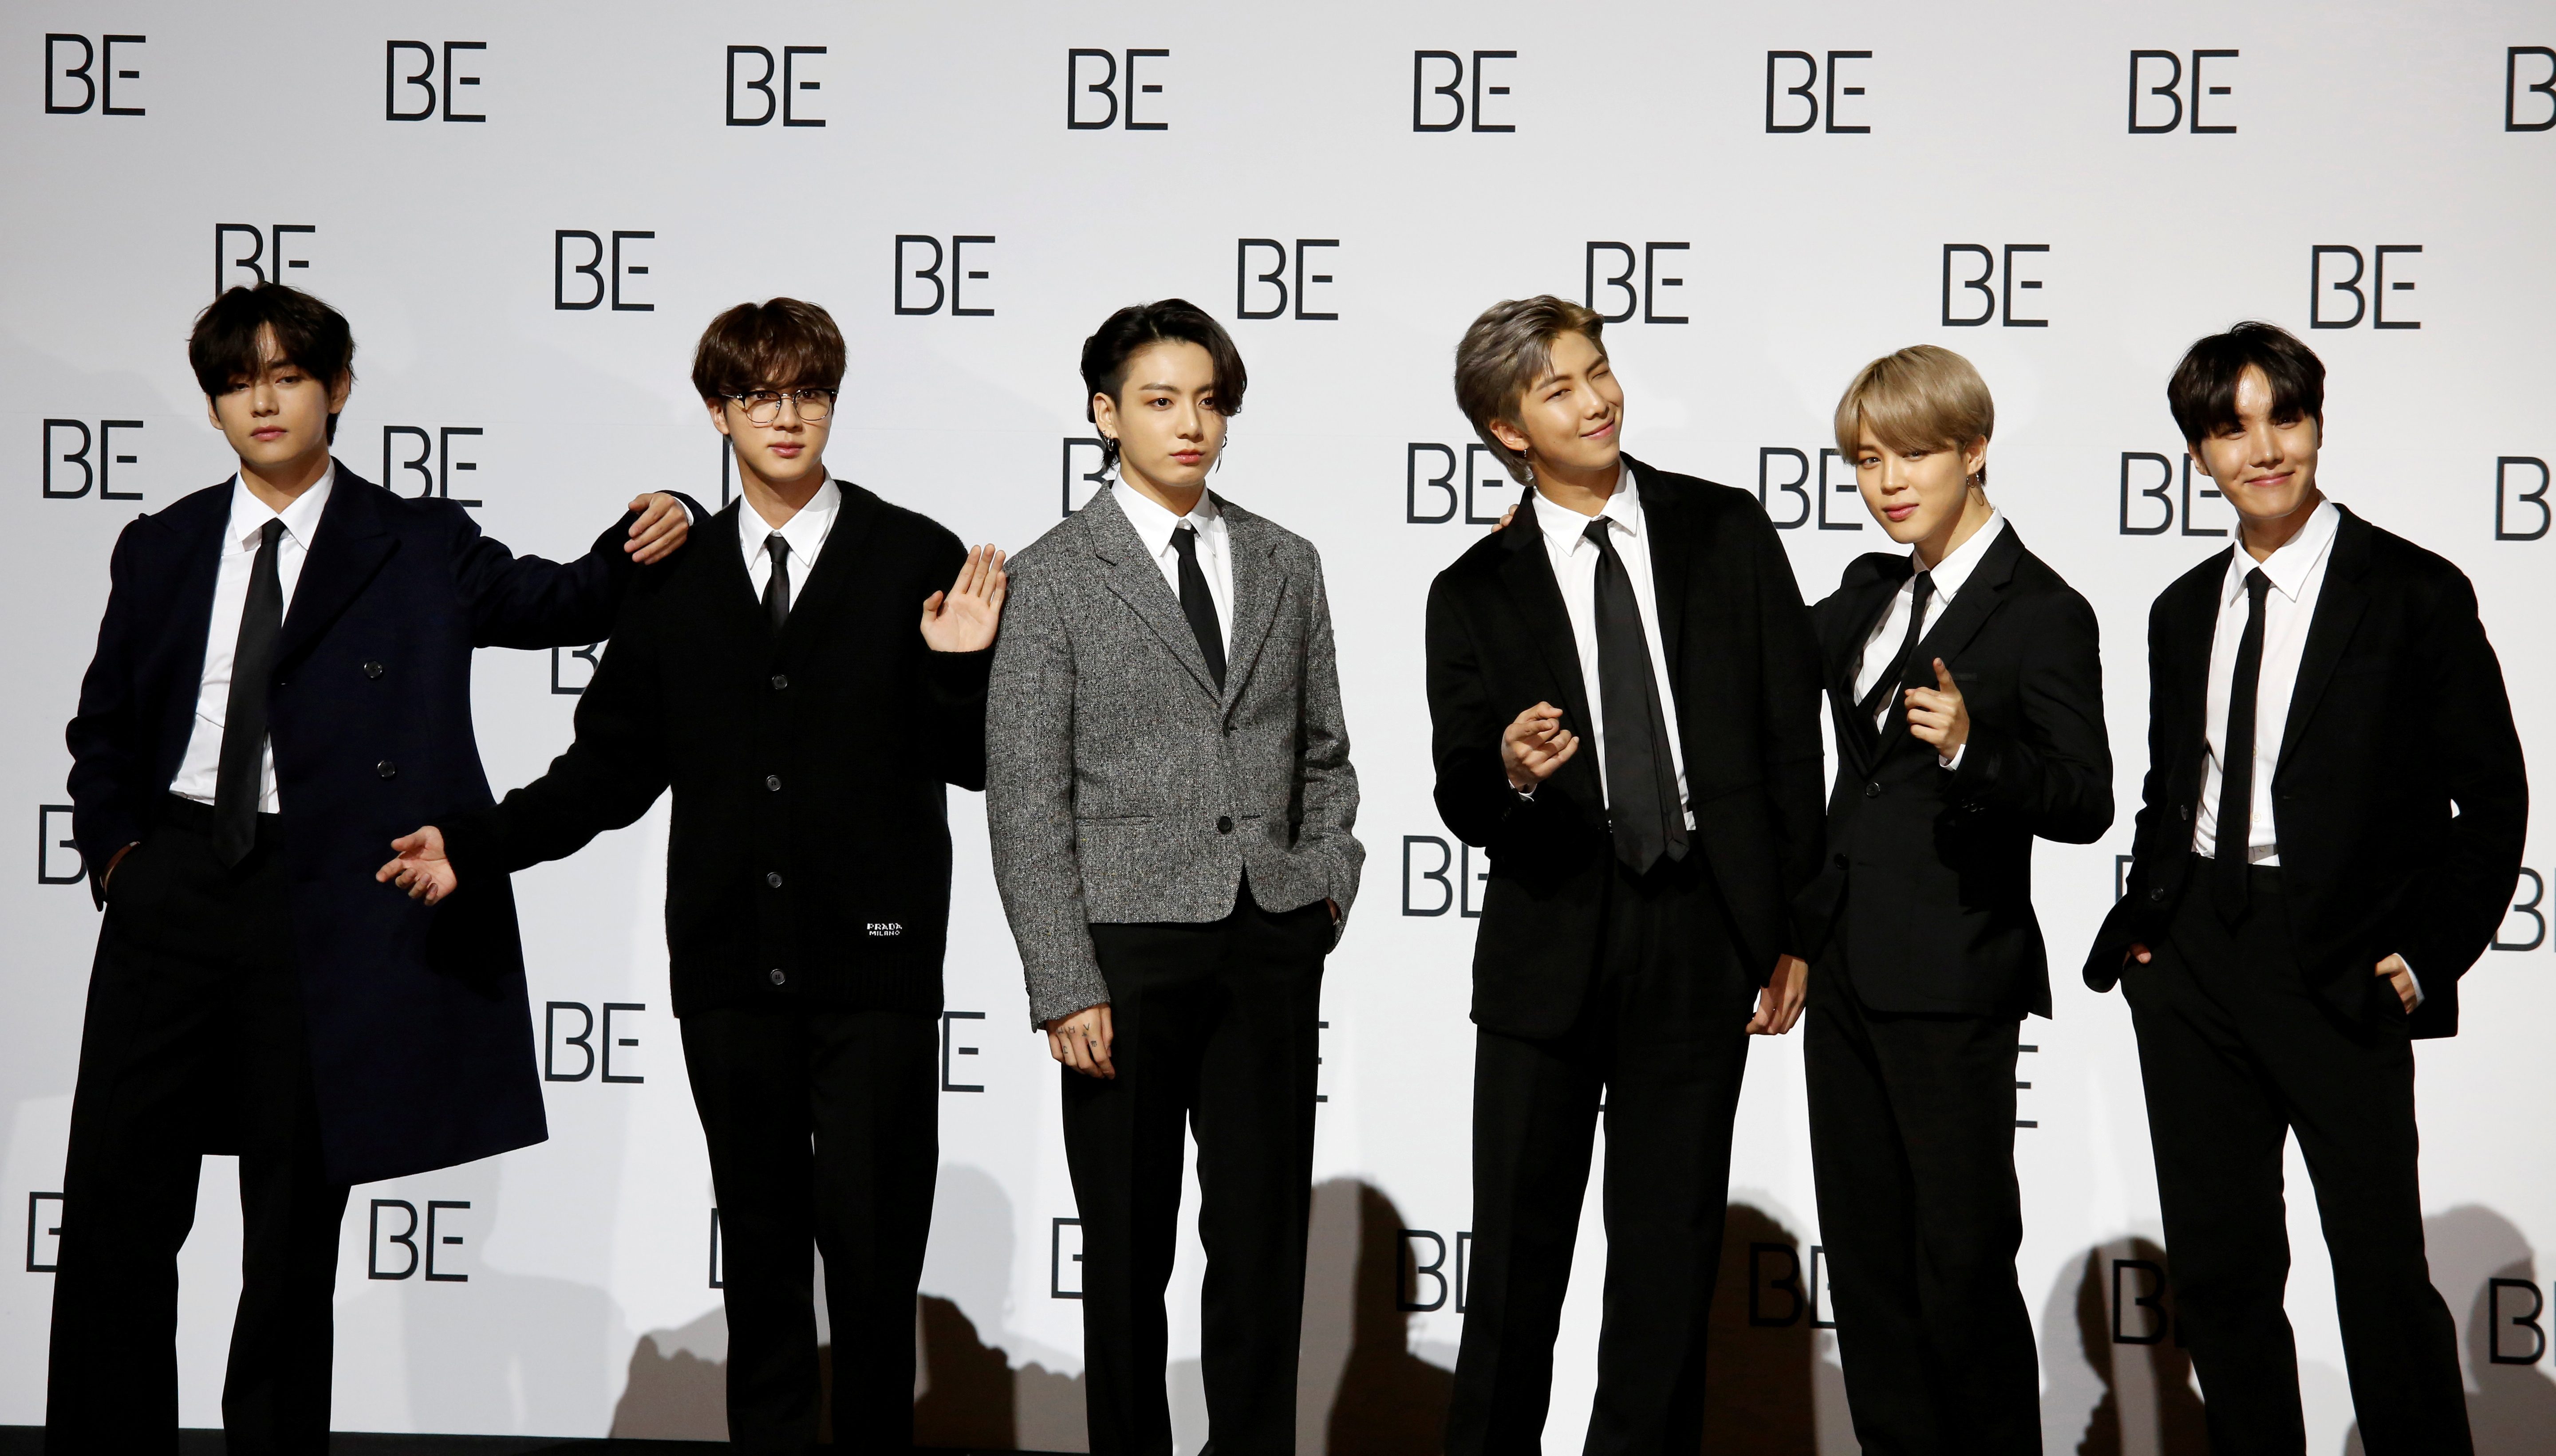 ‘We have the right to be respected:’ BTS joins calls to ‘Stop Asian Hate’